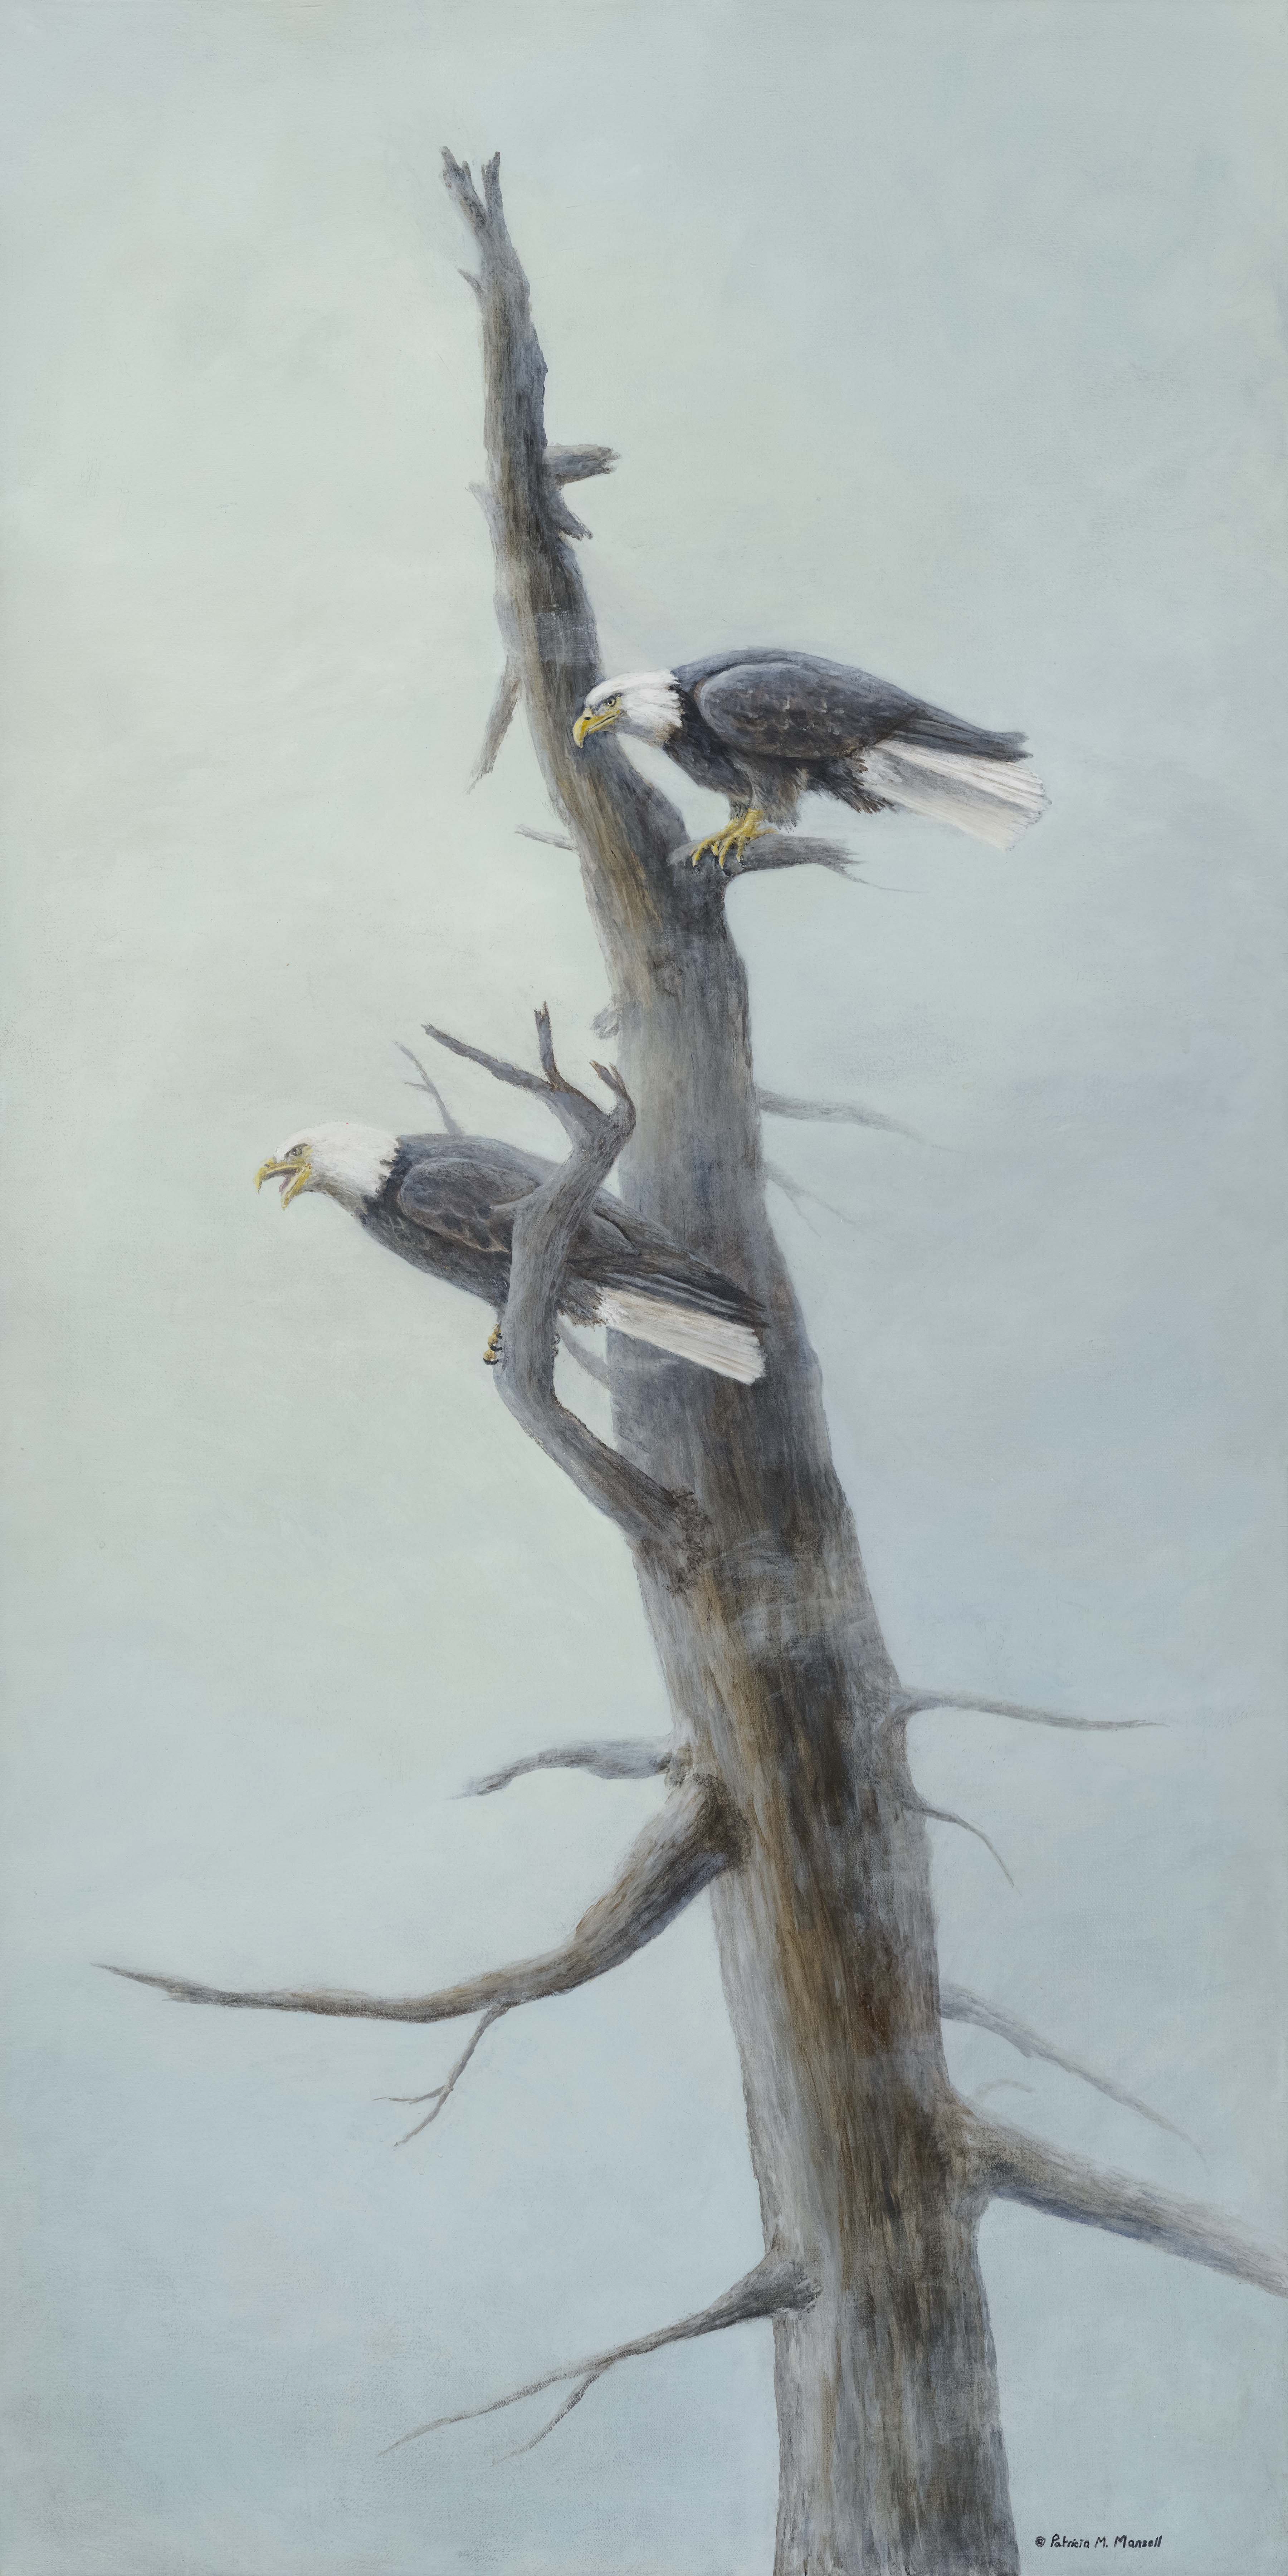 Bald Eagles, eagles, perched in tree, background of sky, misted out